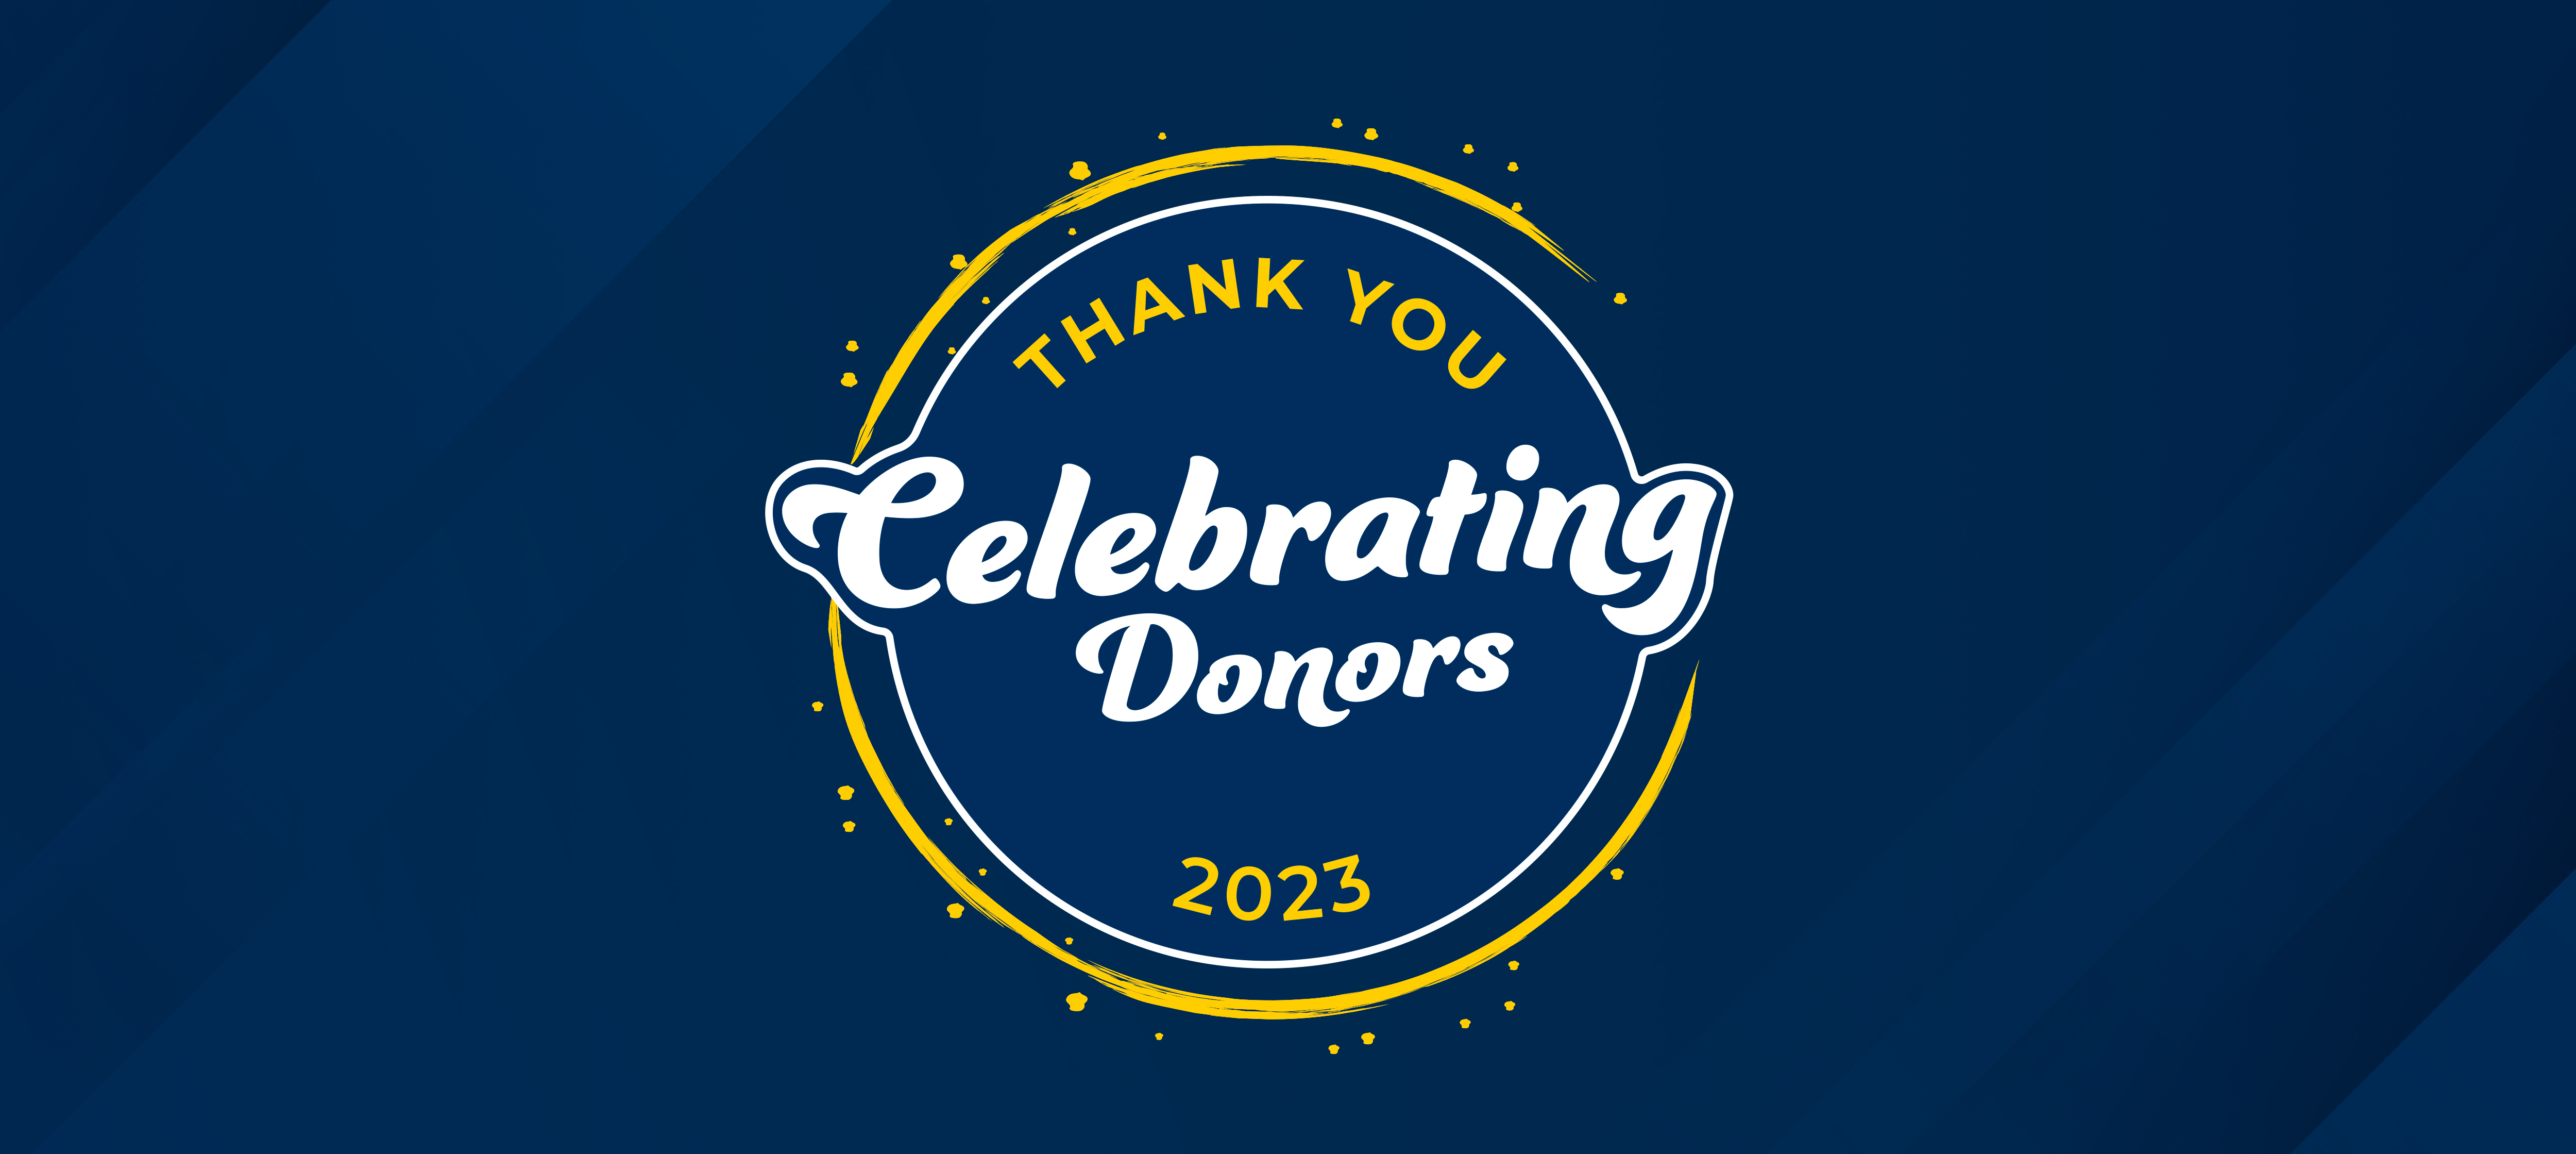 2023 Celebrating Donors, Thank You!